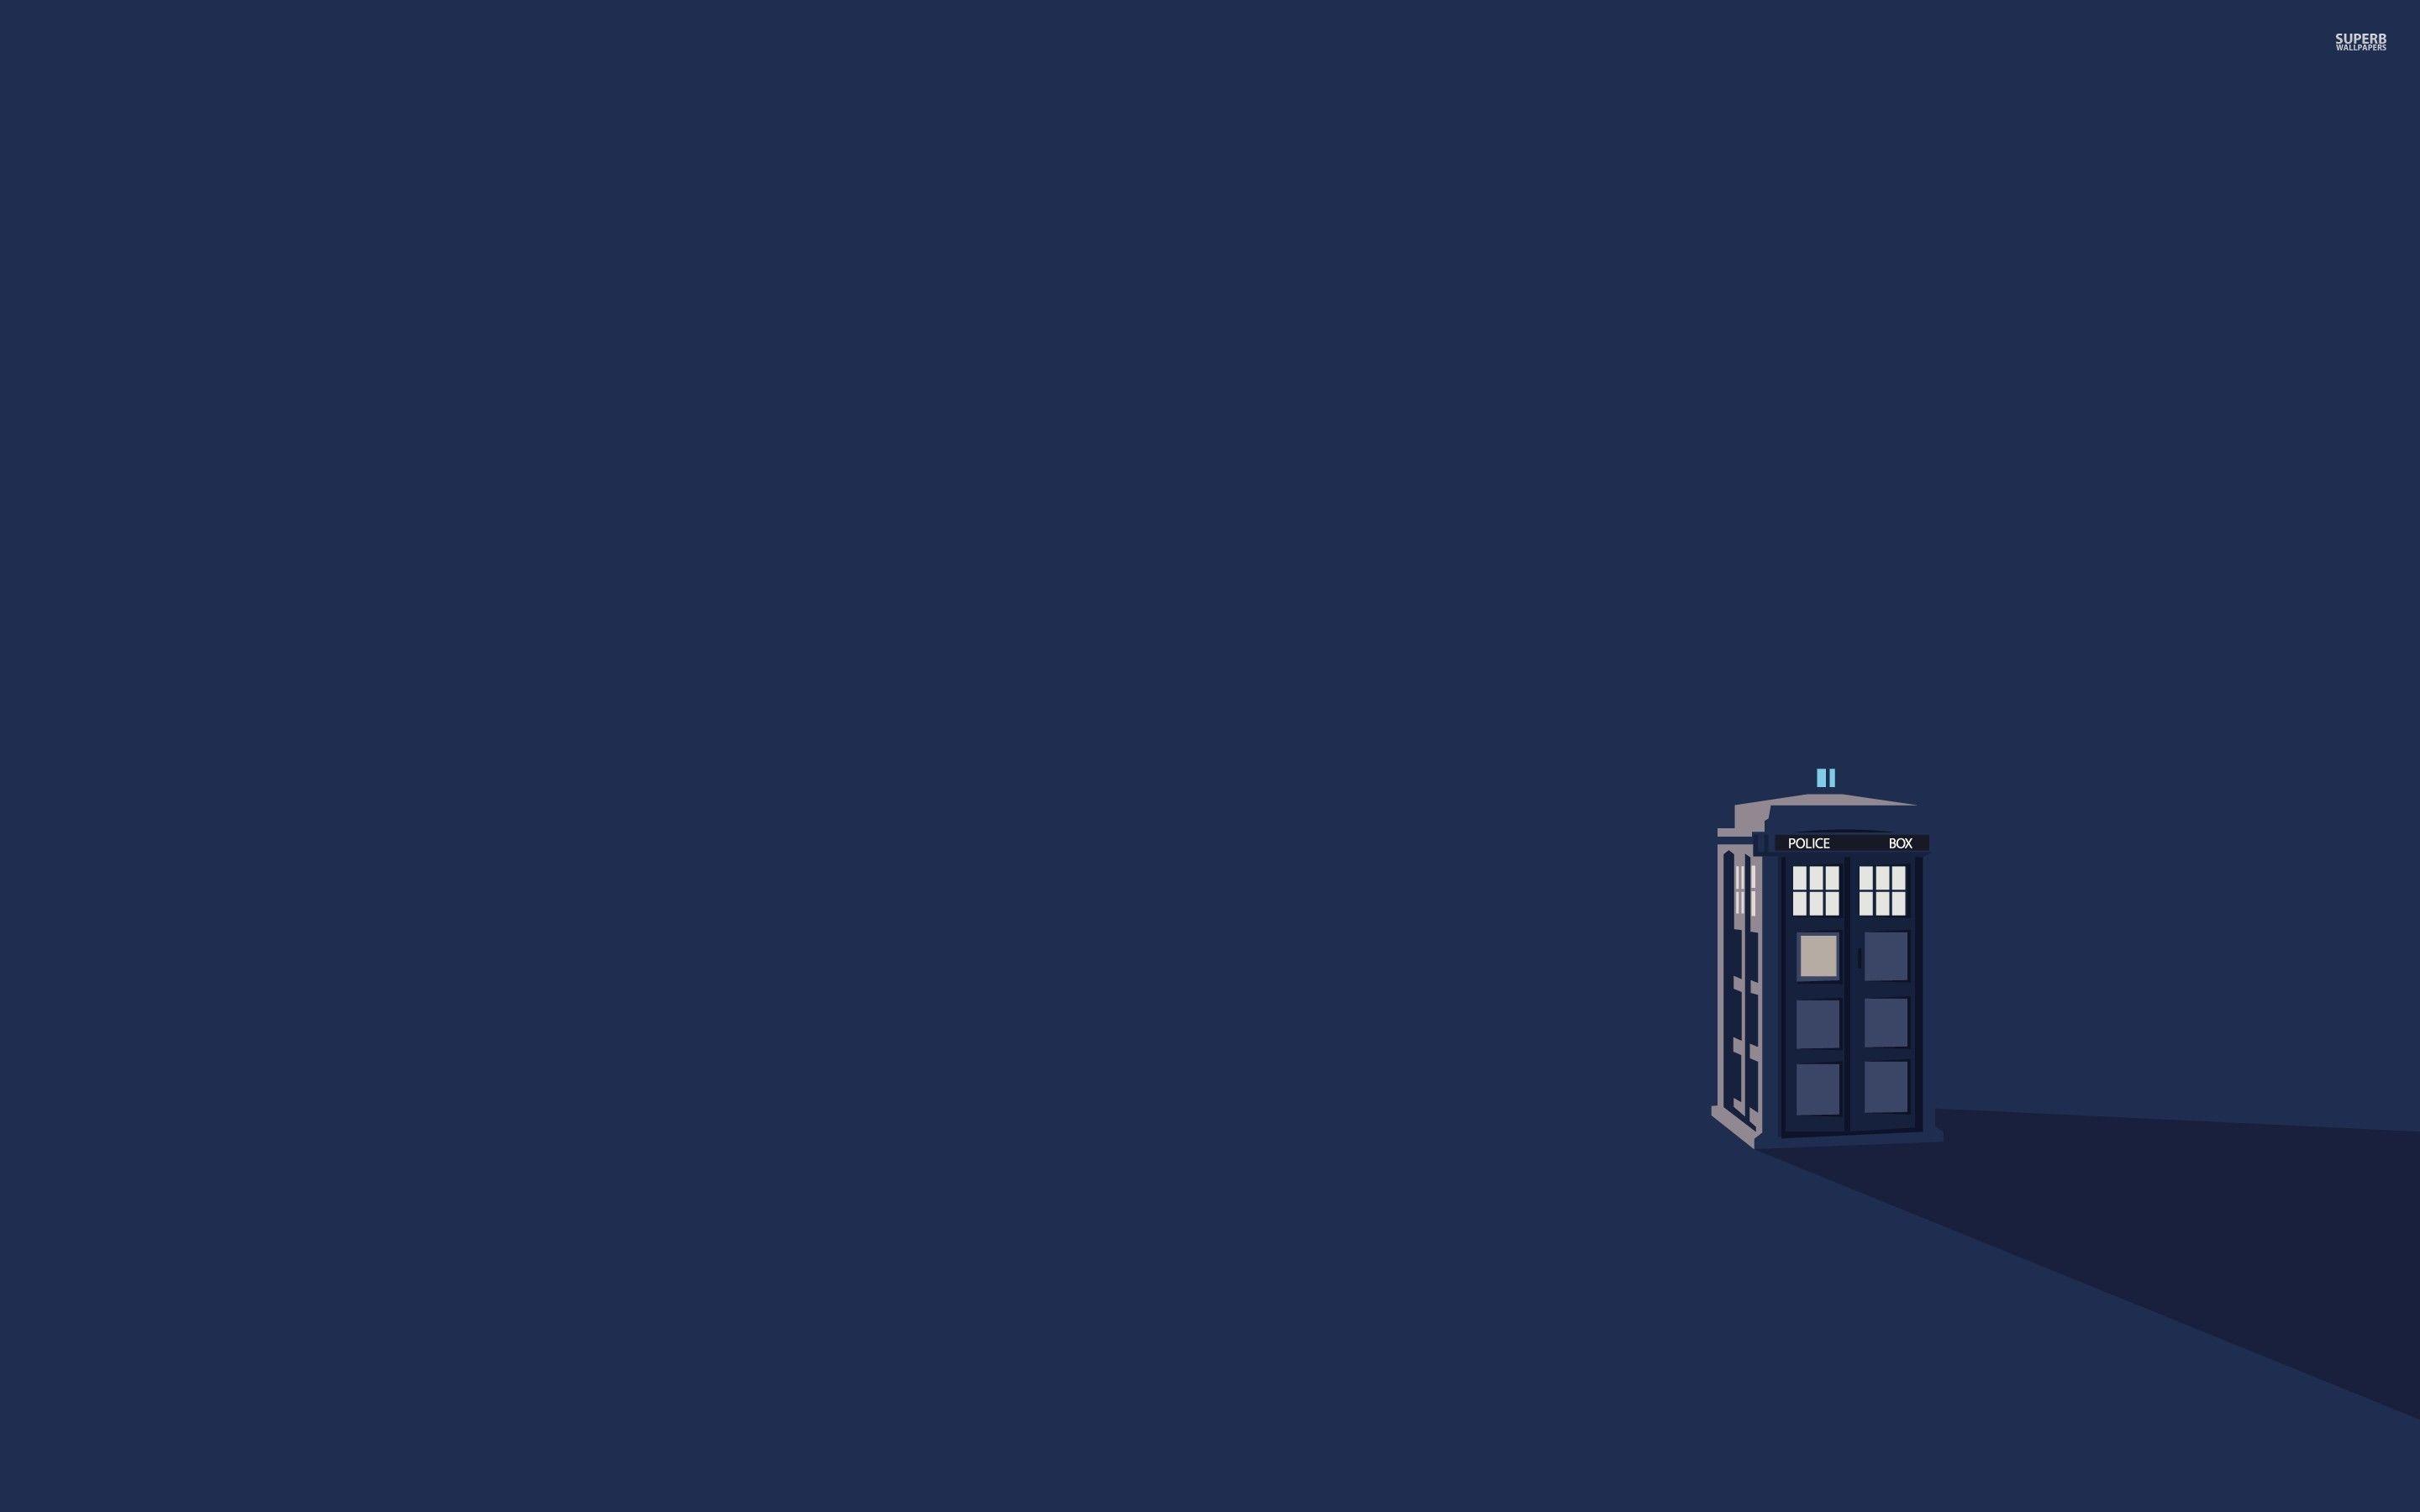 Doctor Who Wallpaper For Background, Andre Donelson 89 for PC & Mac